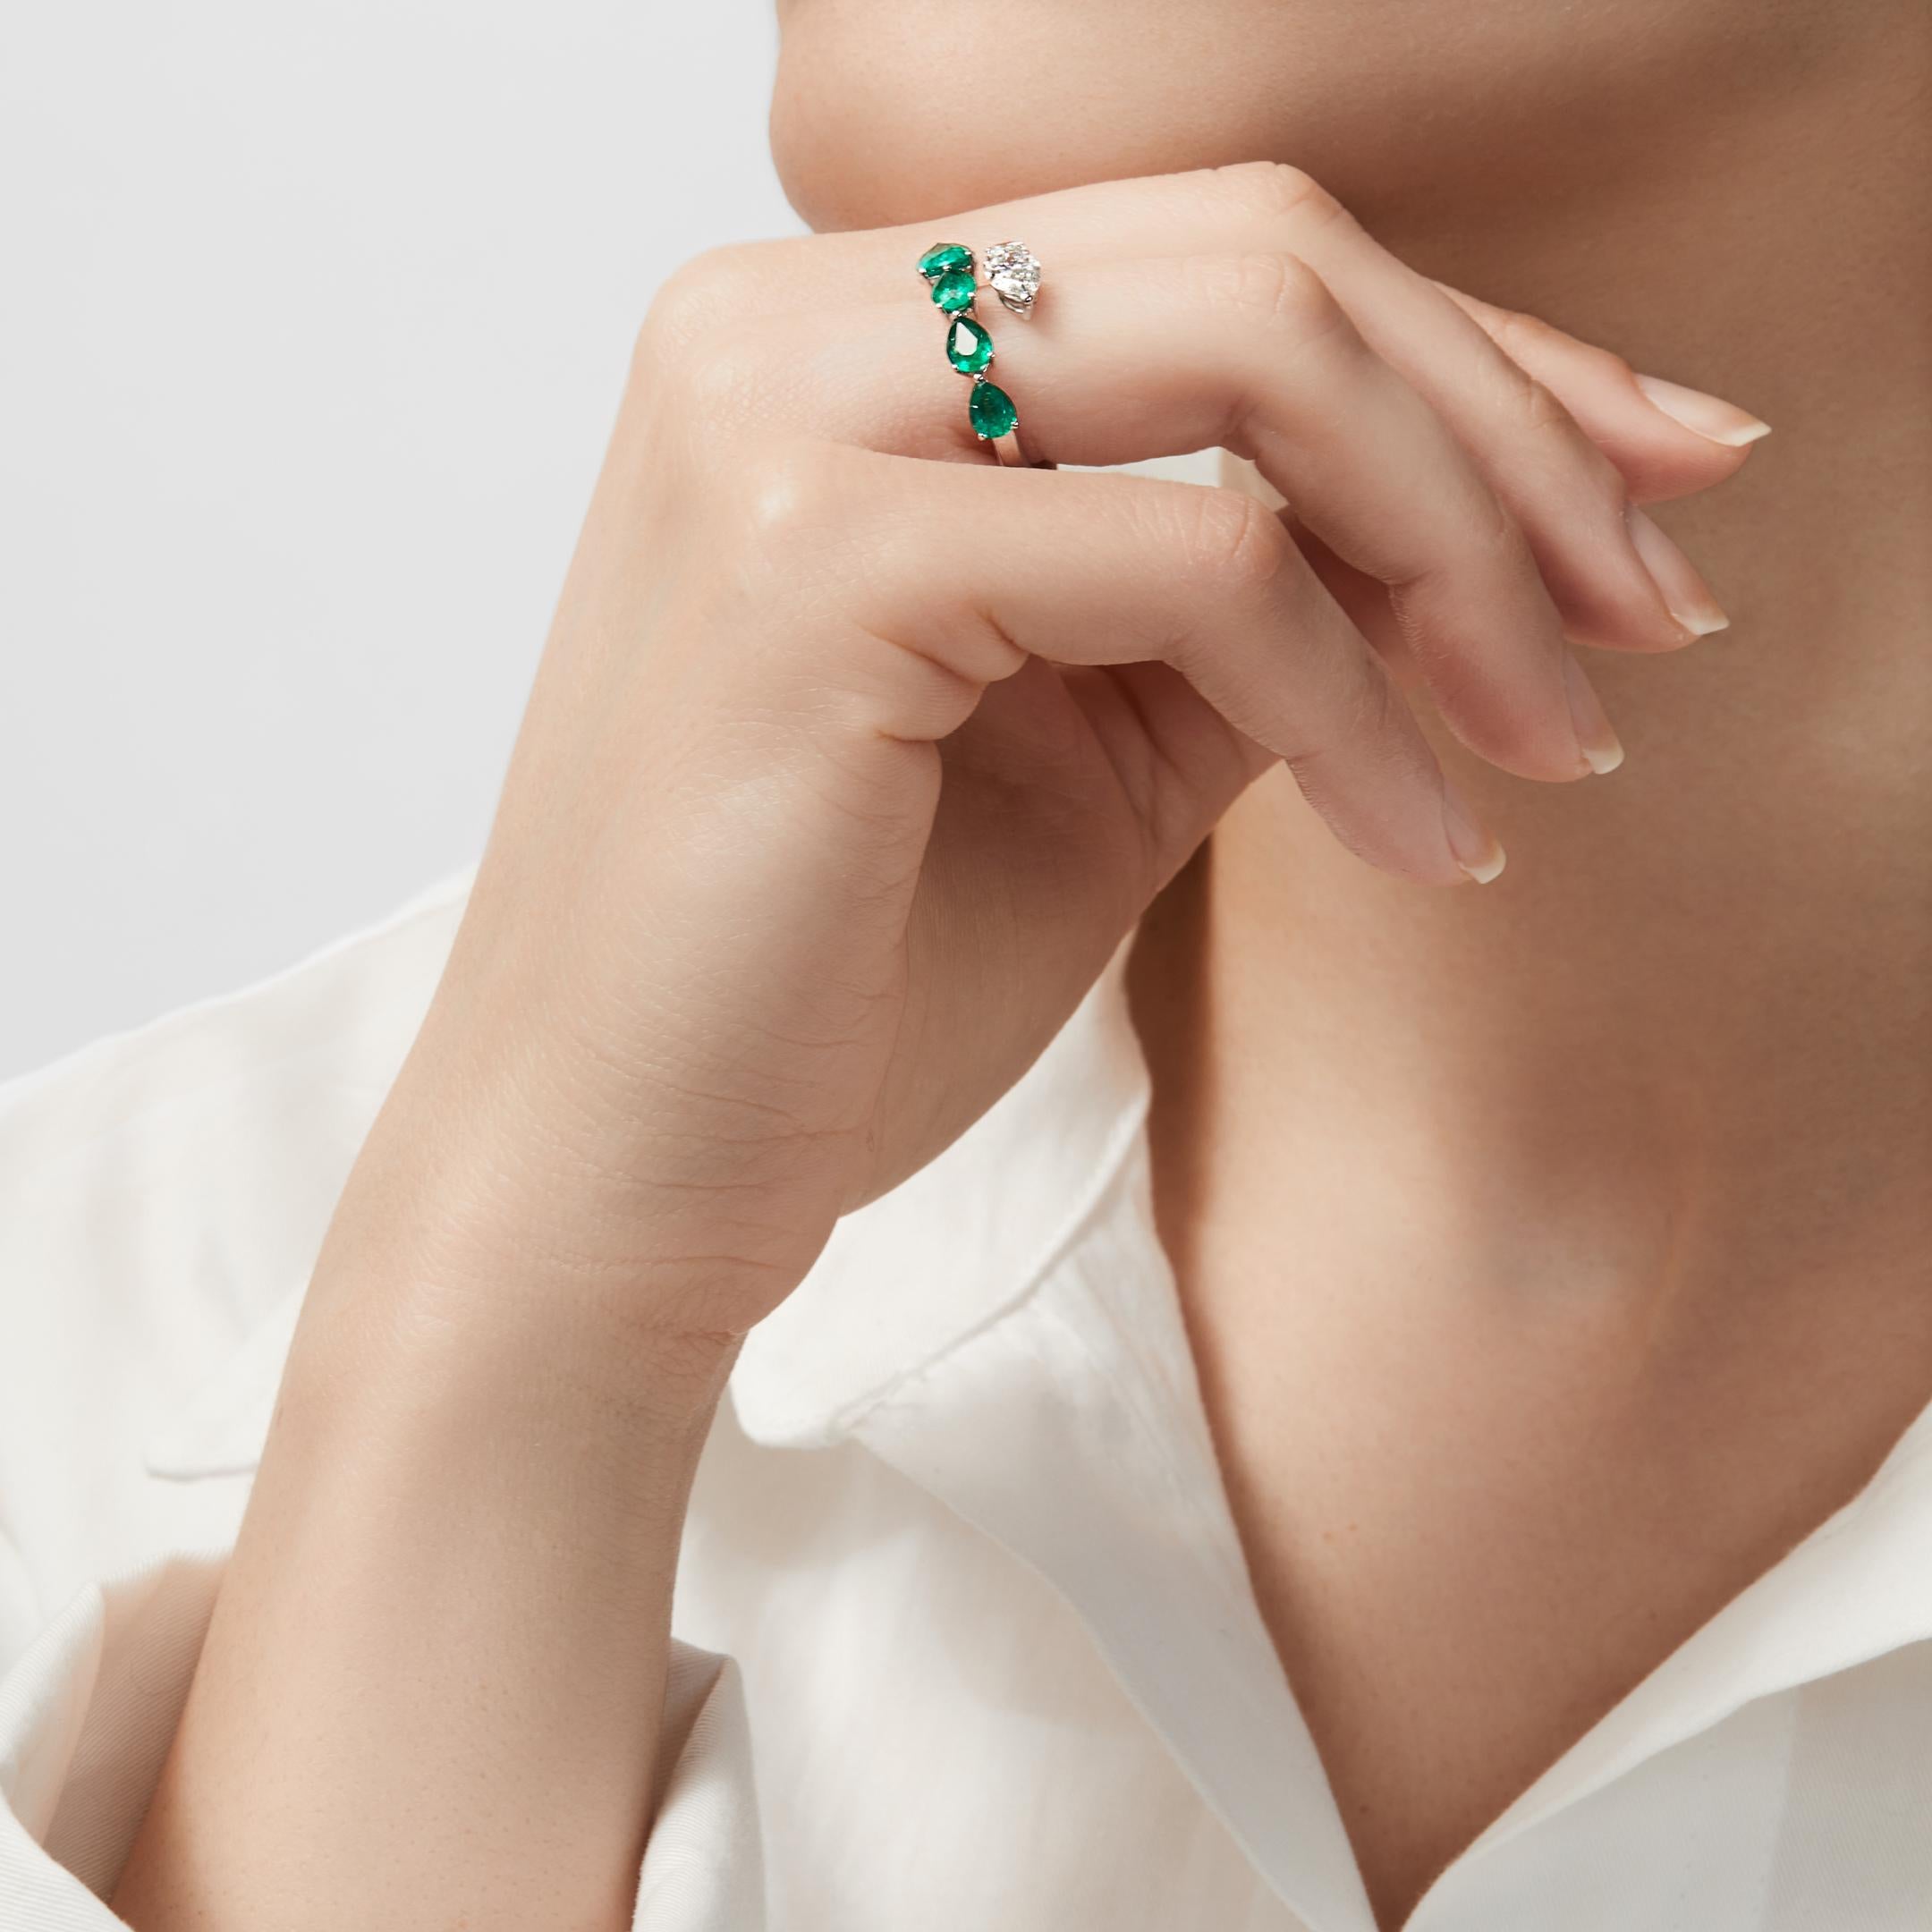 Your perfect accessory awaits in the Diamond and Emerald Bypass Ring. This chic statement piece embraces the finger with a line of pear-shaped diamonds that faces a row of pear-shaped emeralds. The ring’s open design is fashion-forward, yet–like all